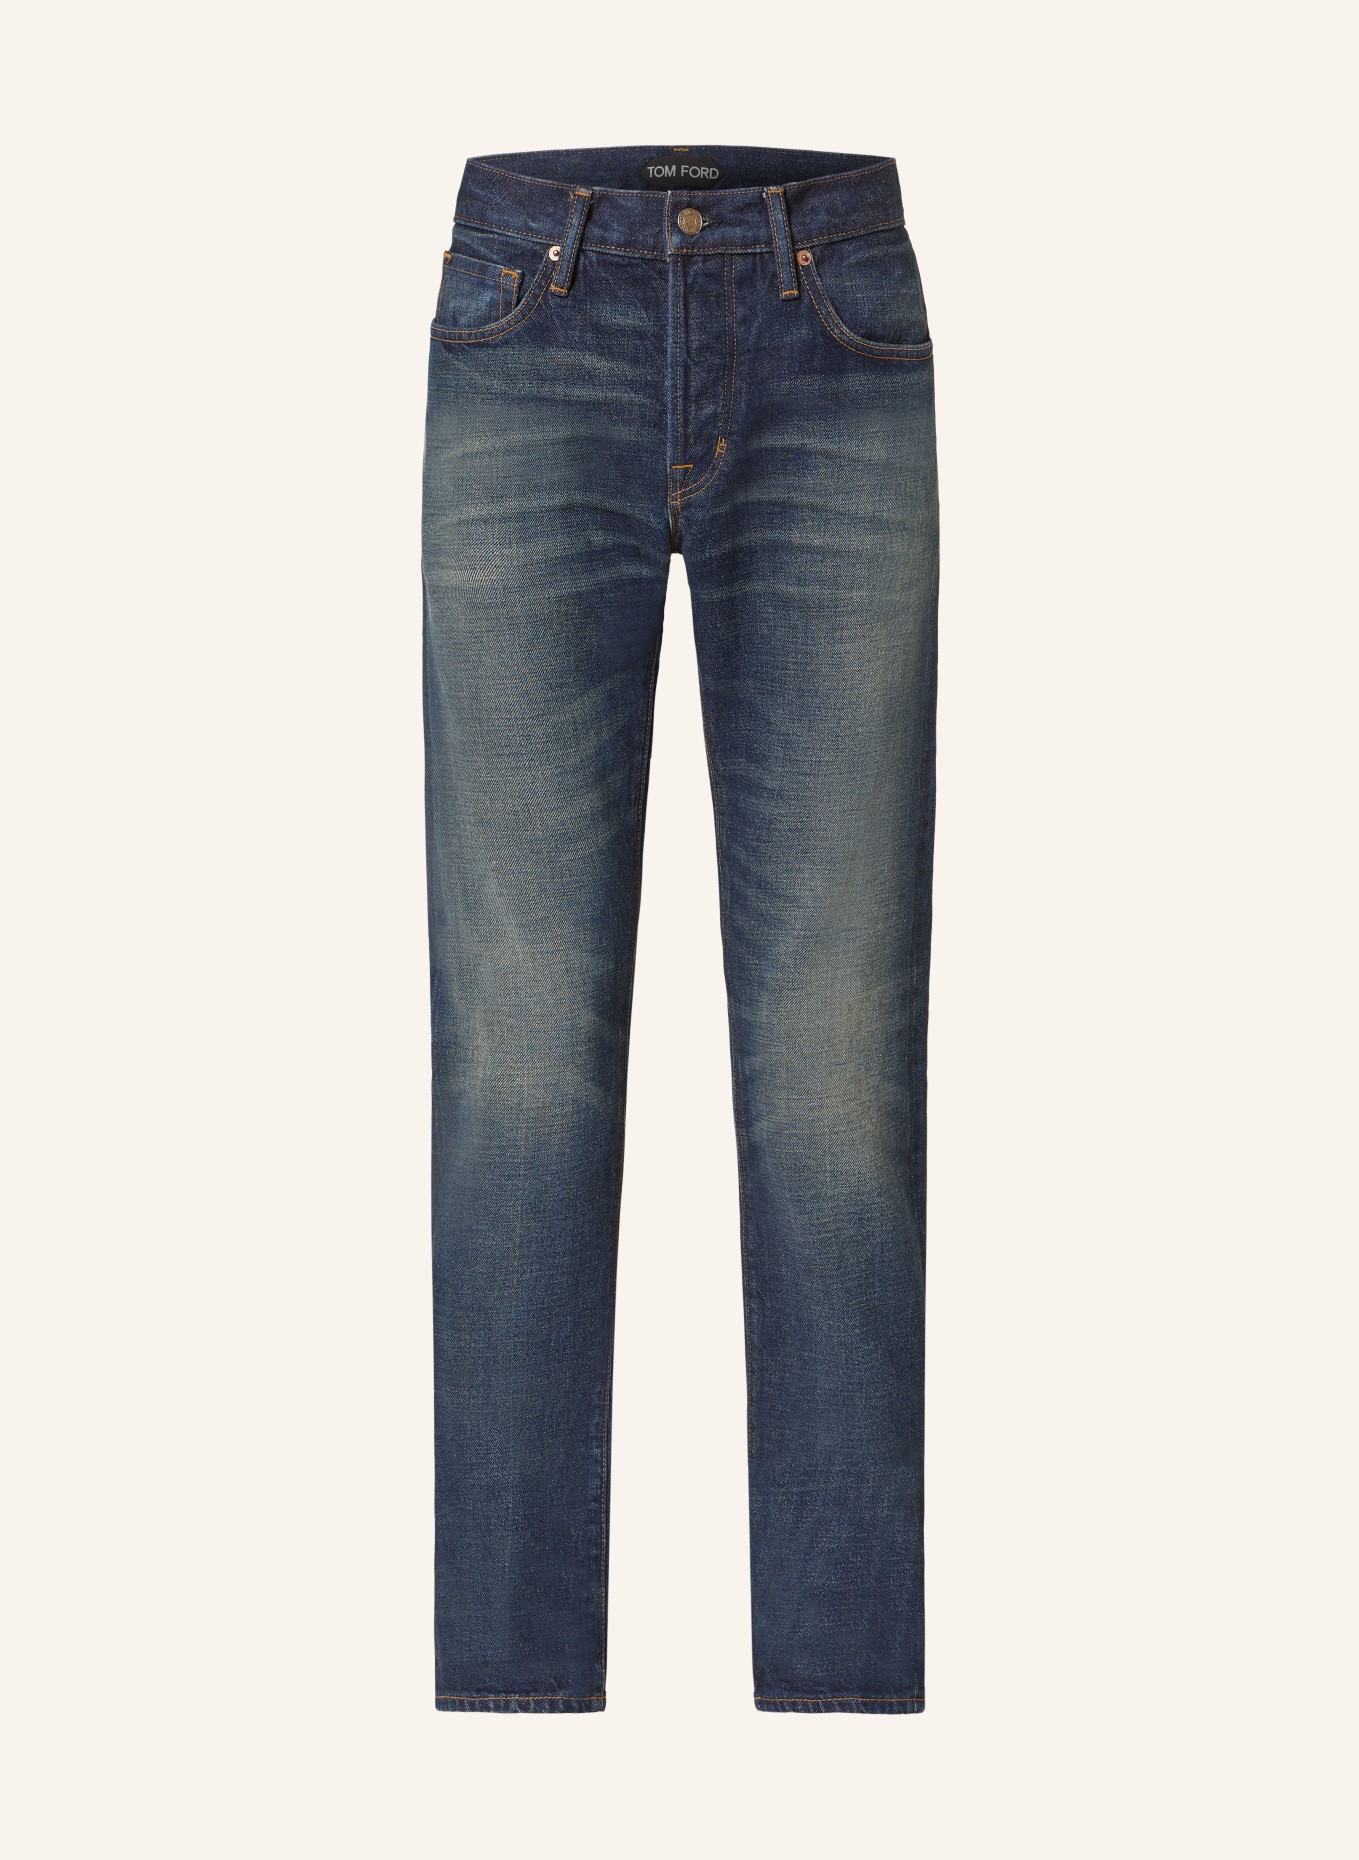 TOM FORD Jeans standard fit, Color: HB523 STRONG HIGH/LOW BLUE (Image 1)